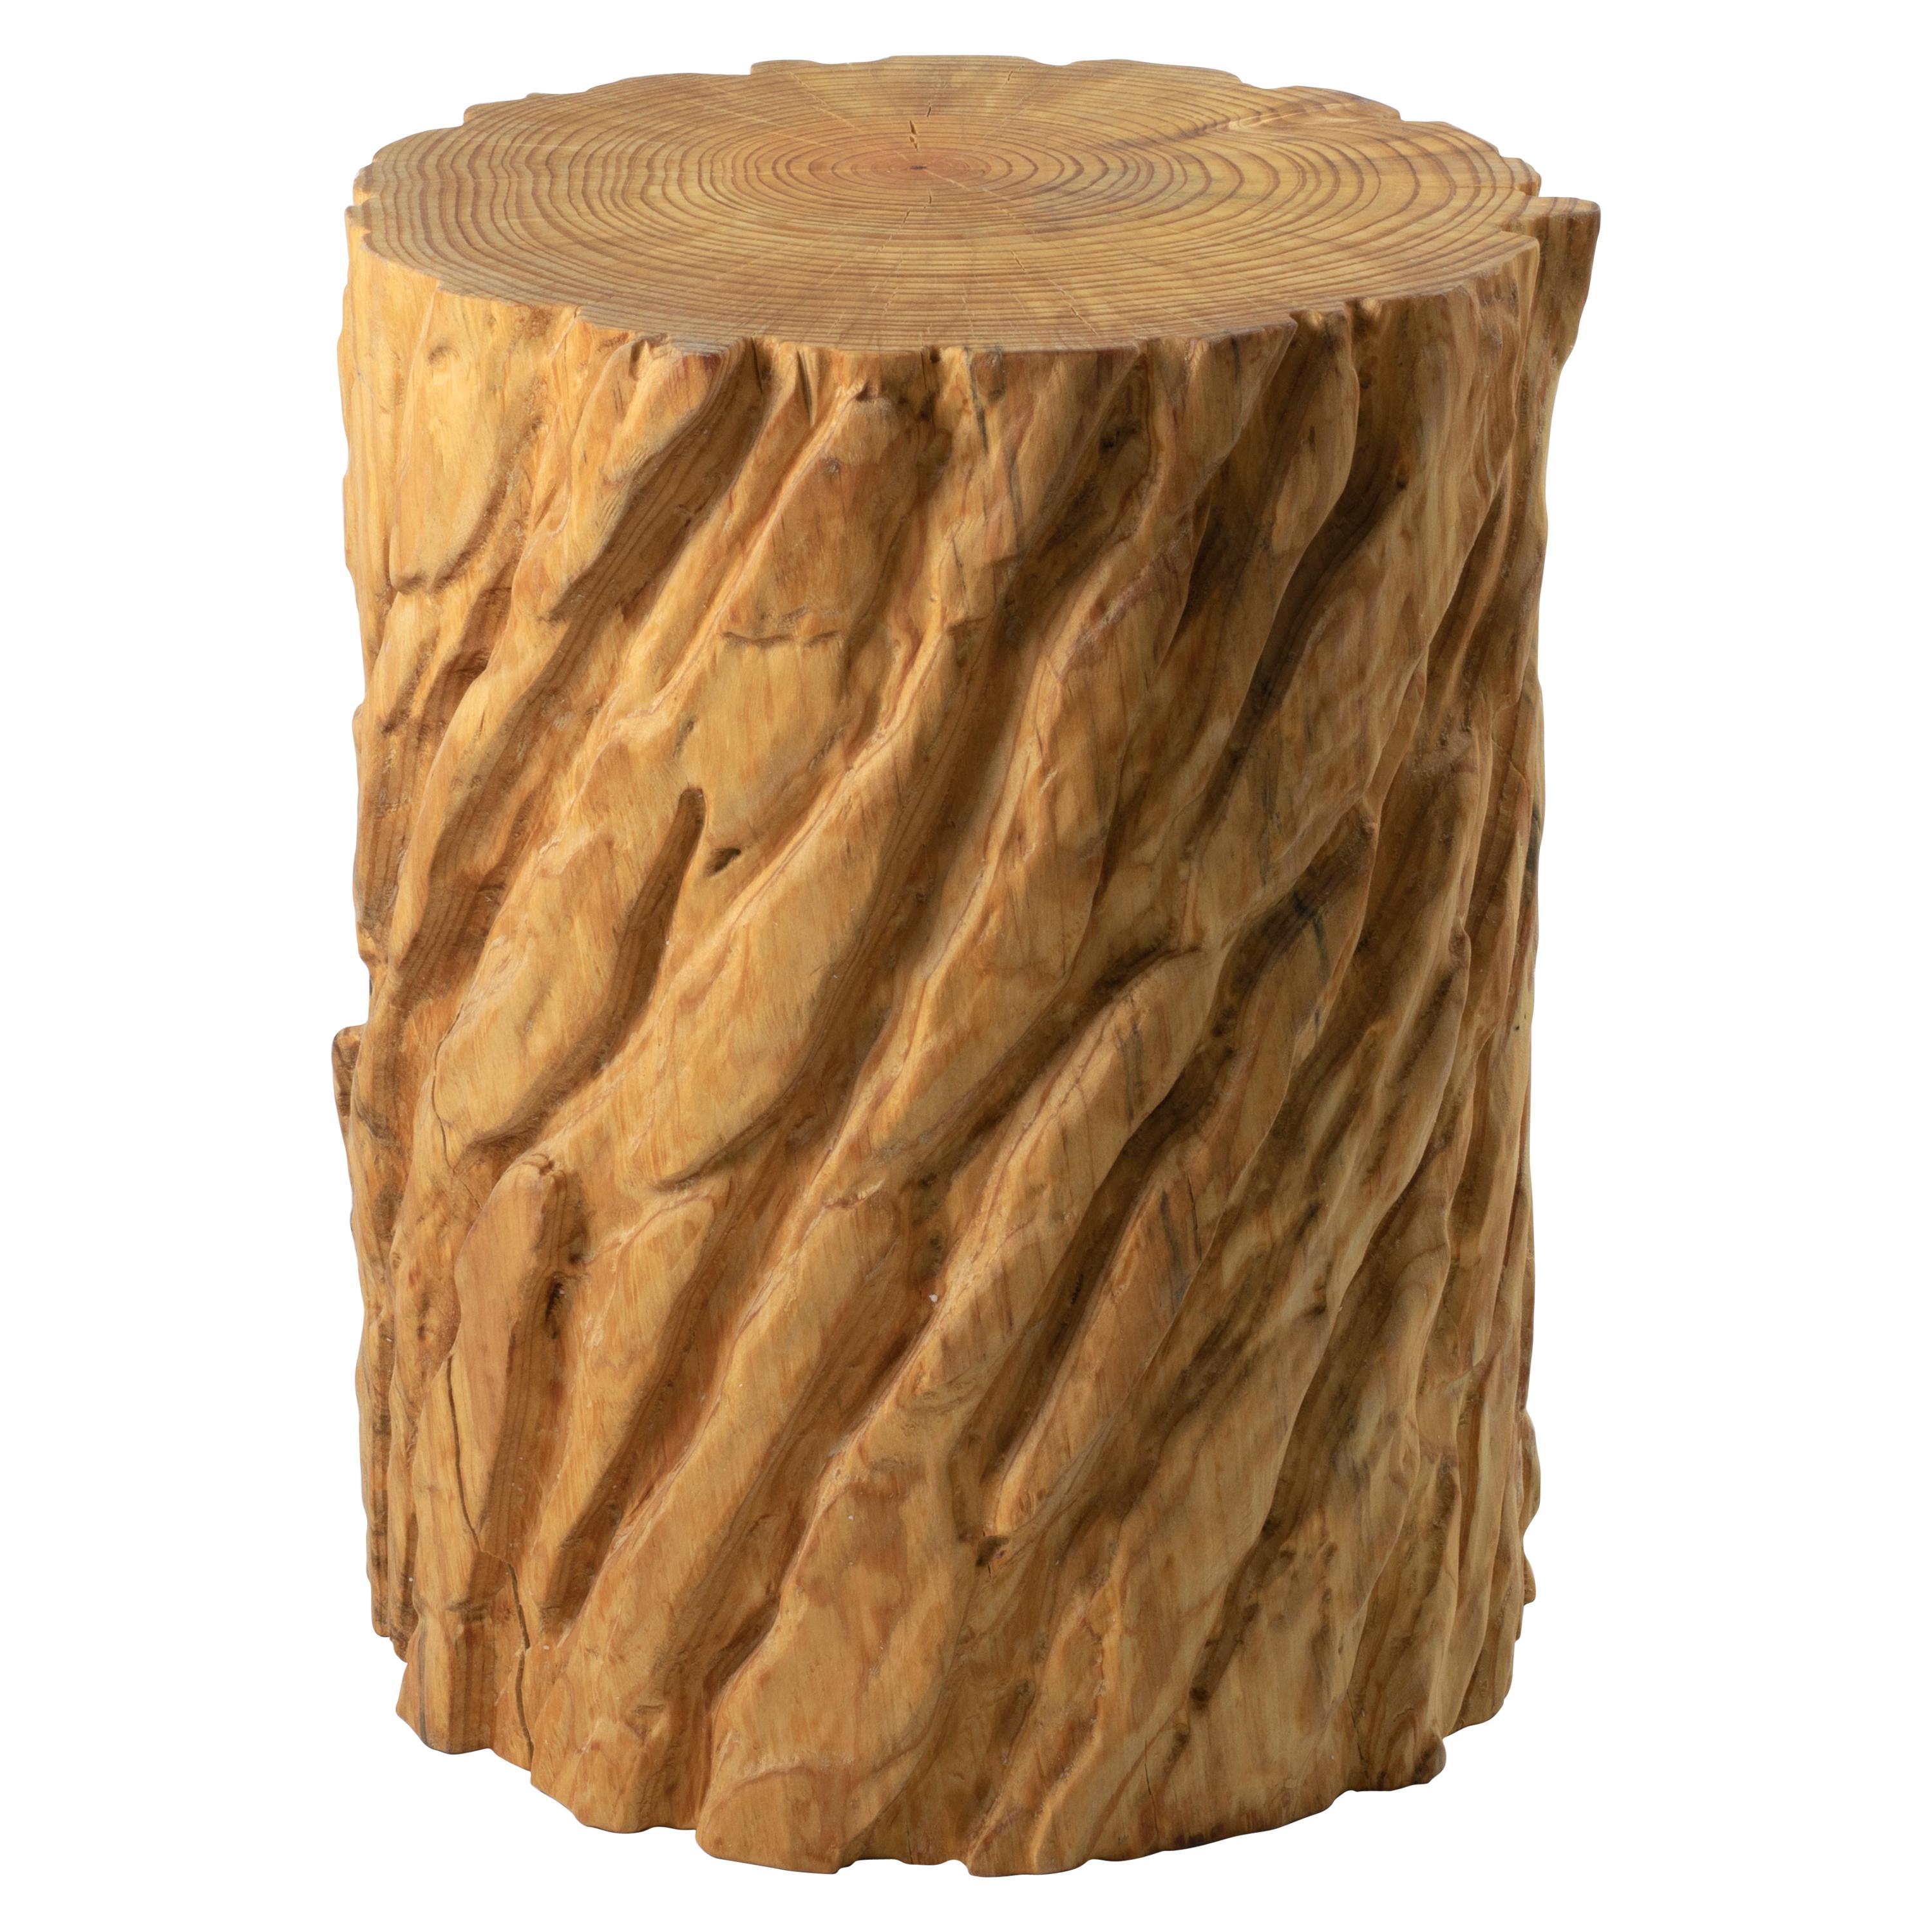 Bark Map Stool, Forty-five by Timbur, Represented by Tuleste Factory For Sale